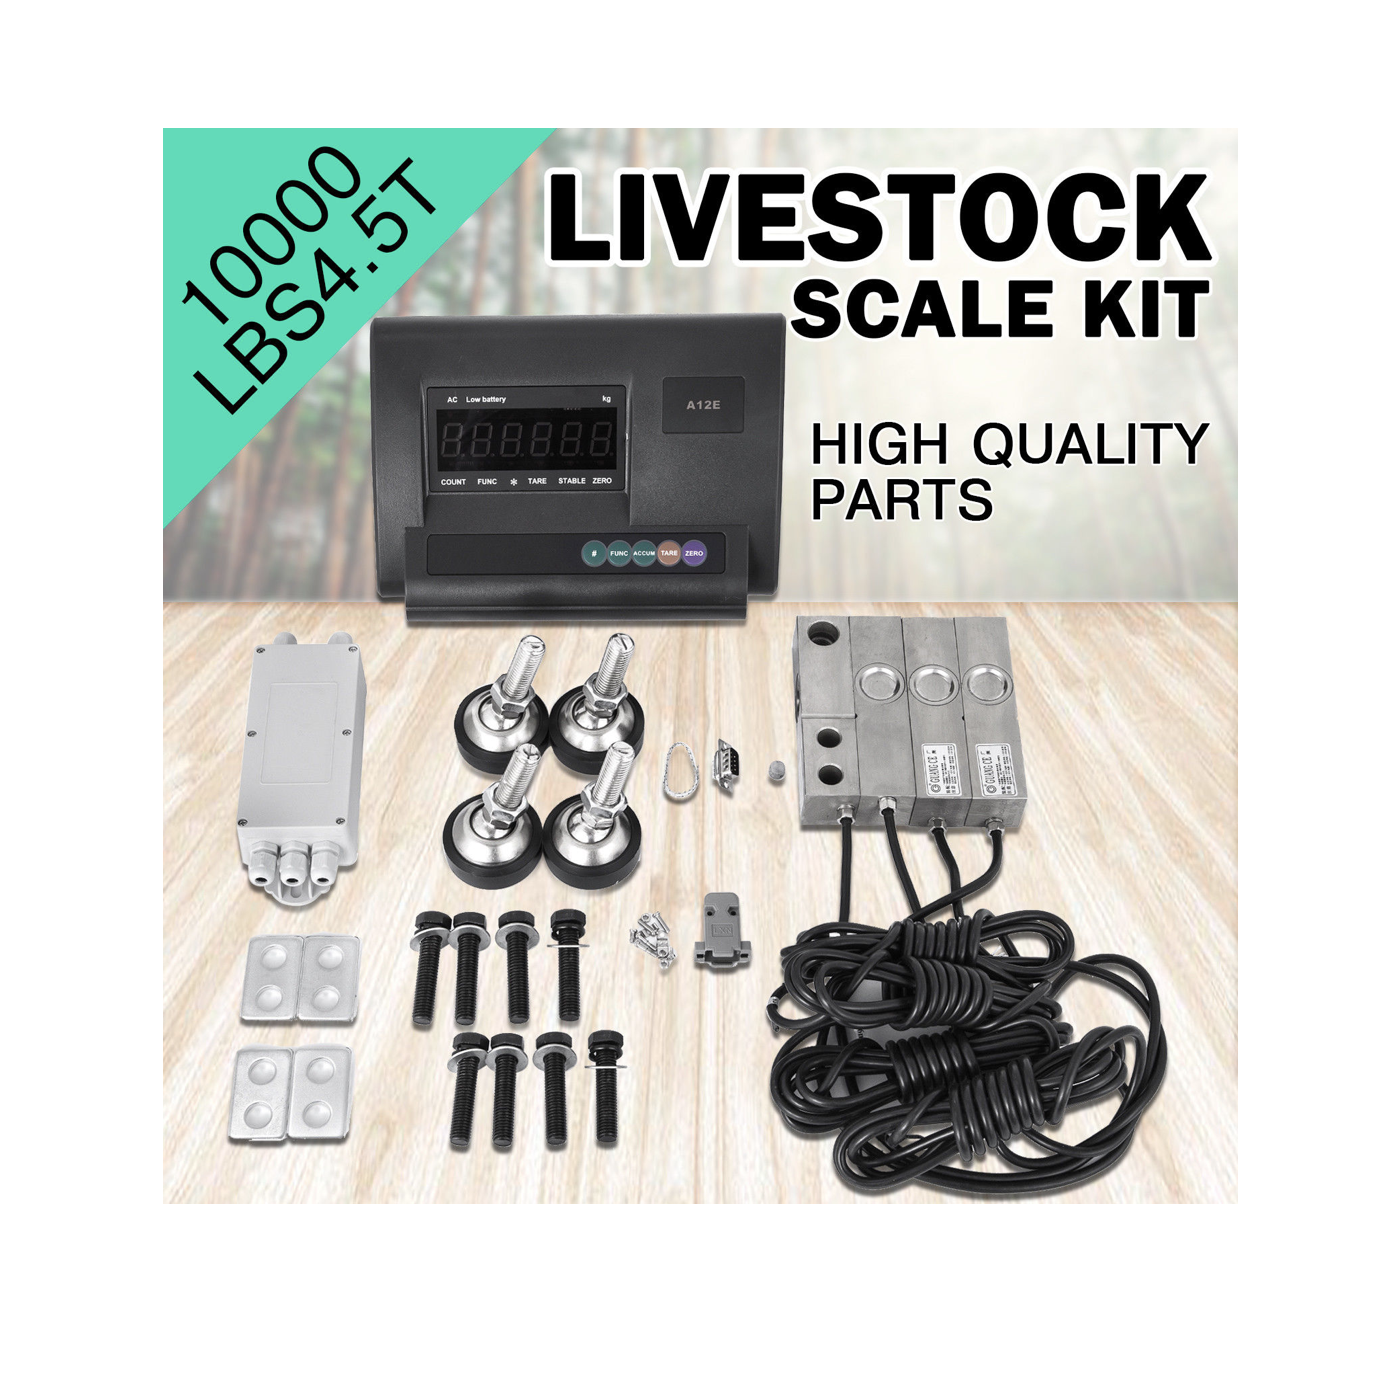 US-LS4320 Animal Livestock Scale with Optional Cage & Printer